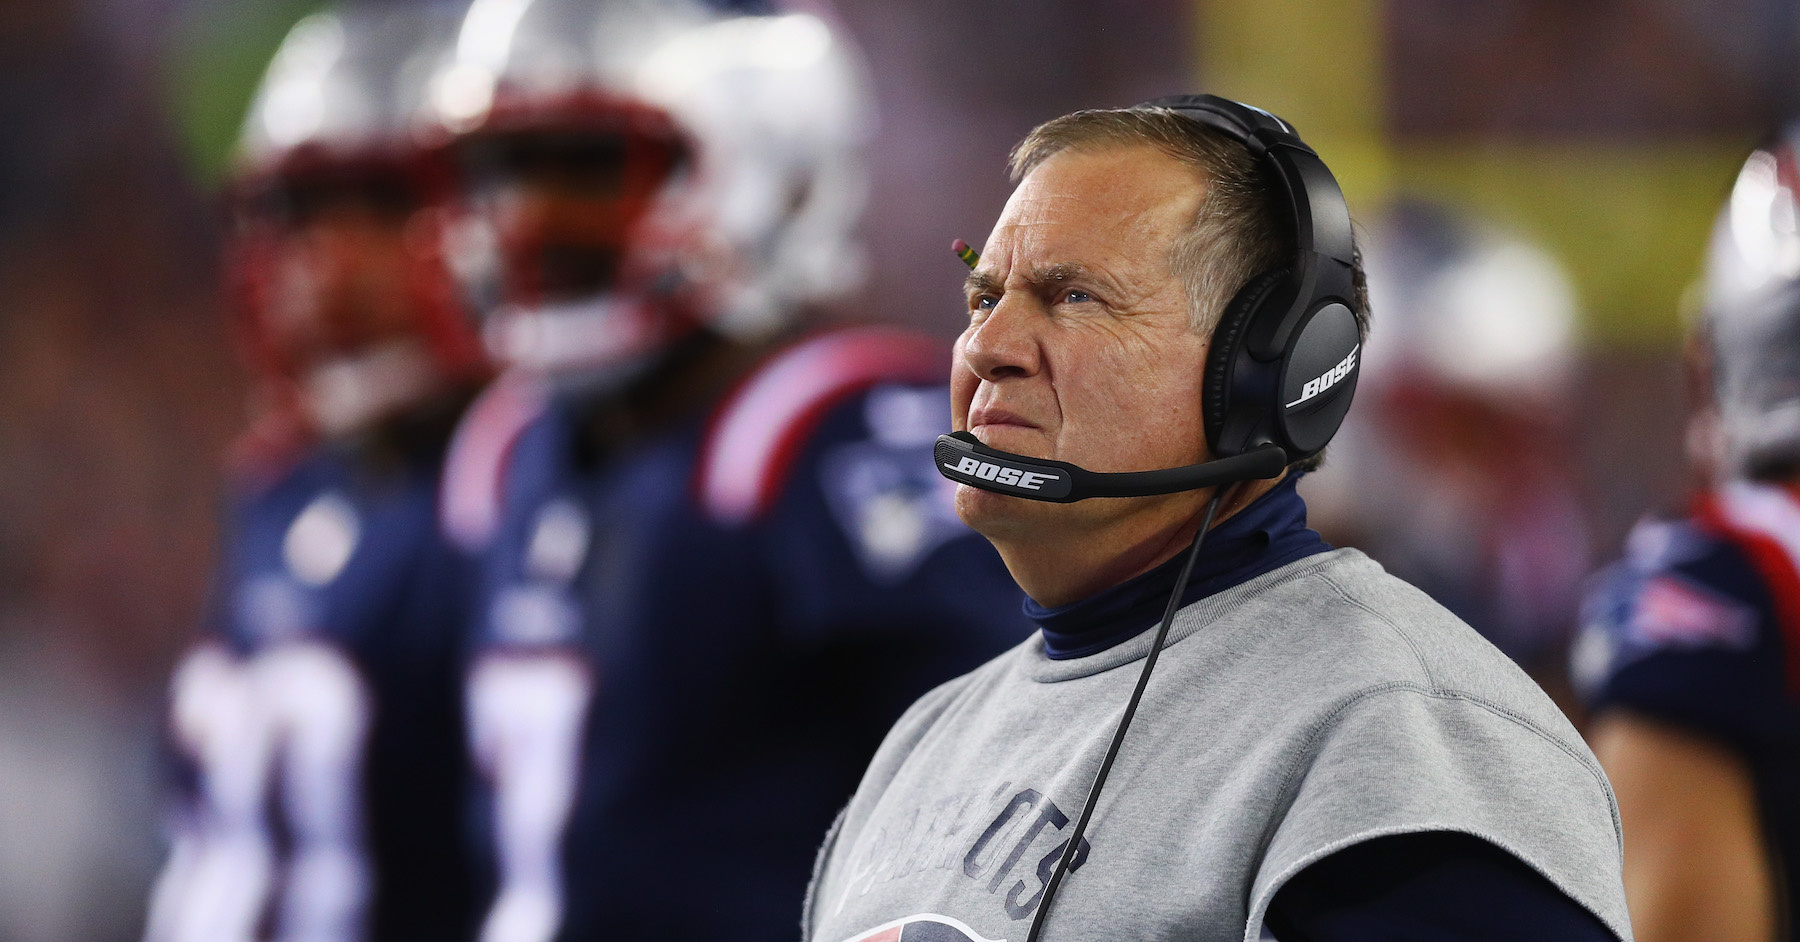 Bill Belichick adds personal touch for 'Salute to Service